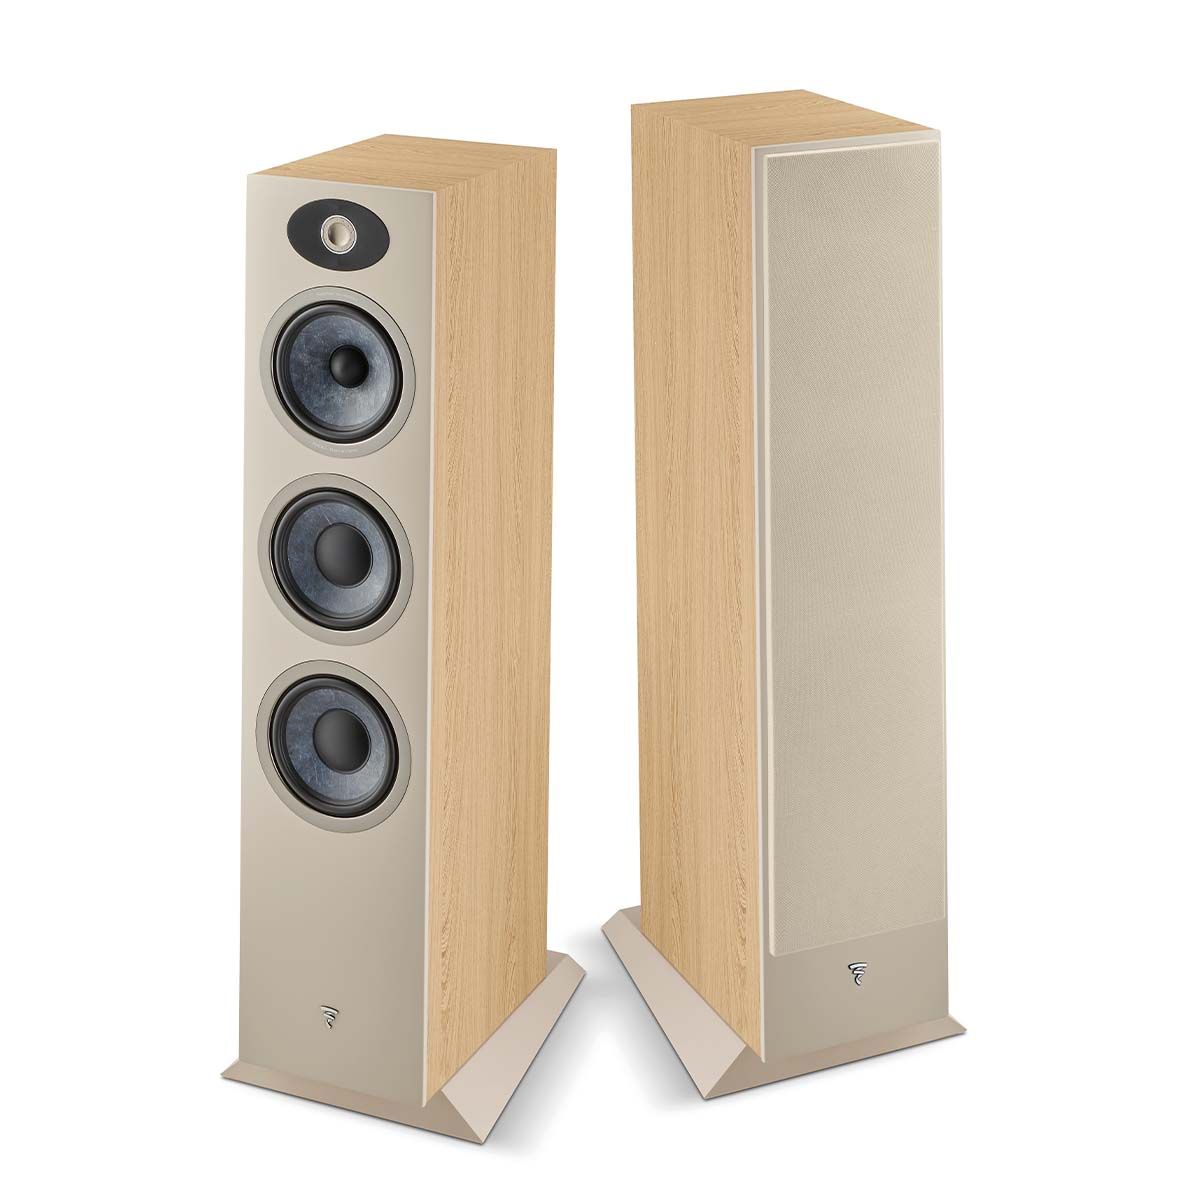 Focal Theva No3 Floorstanding Speaker - Light Wood - Each - view of pair, one with grille, one without grille